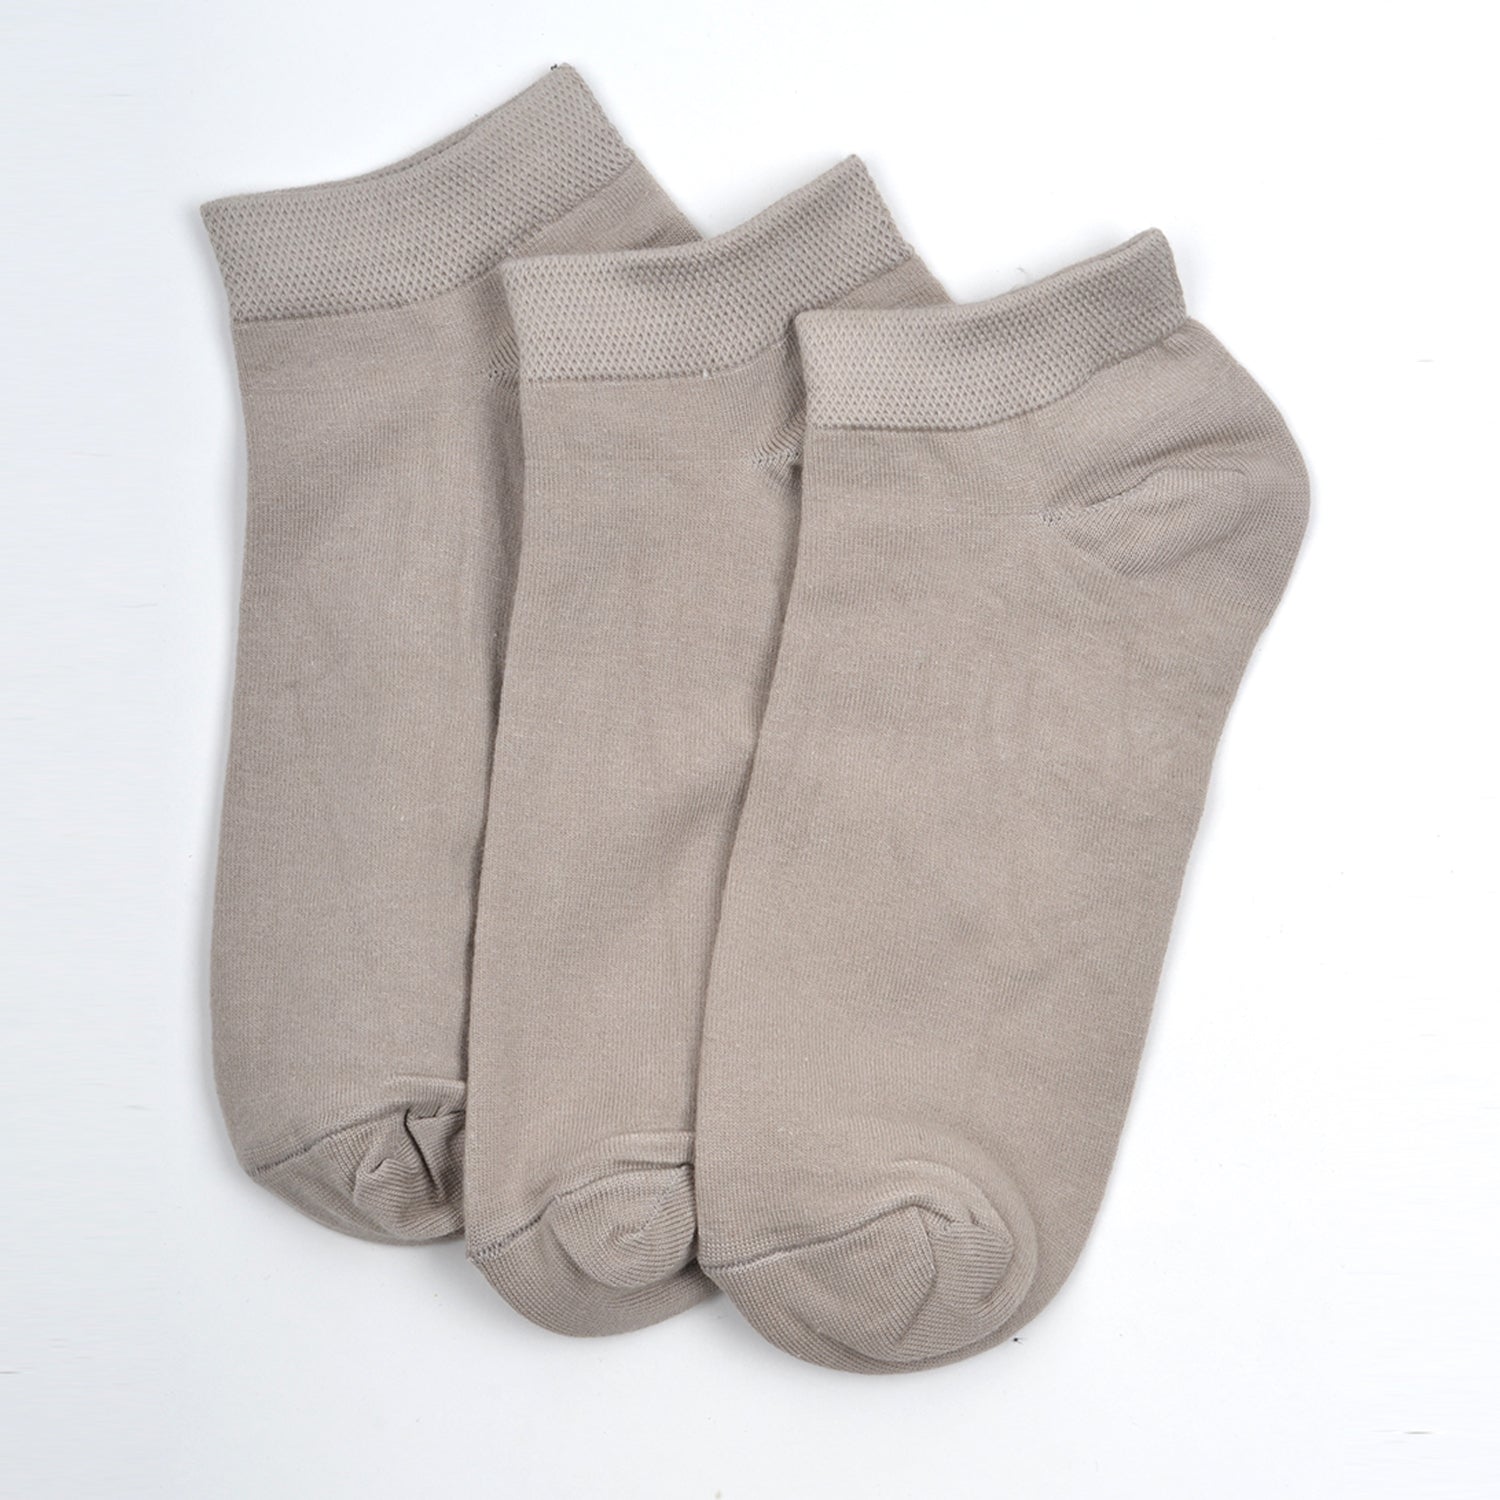 FOOTPRINTS Unisex Solid Cotton Ankle-Length Socks -Pack Of 3 Grey